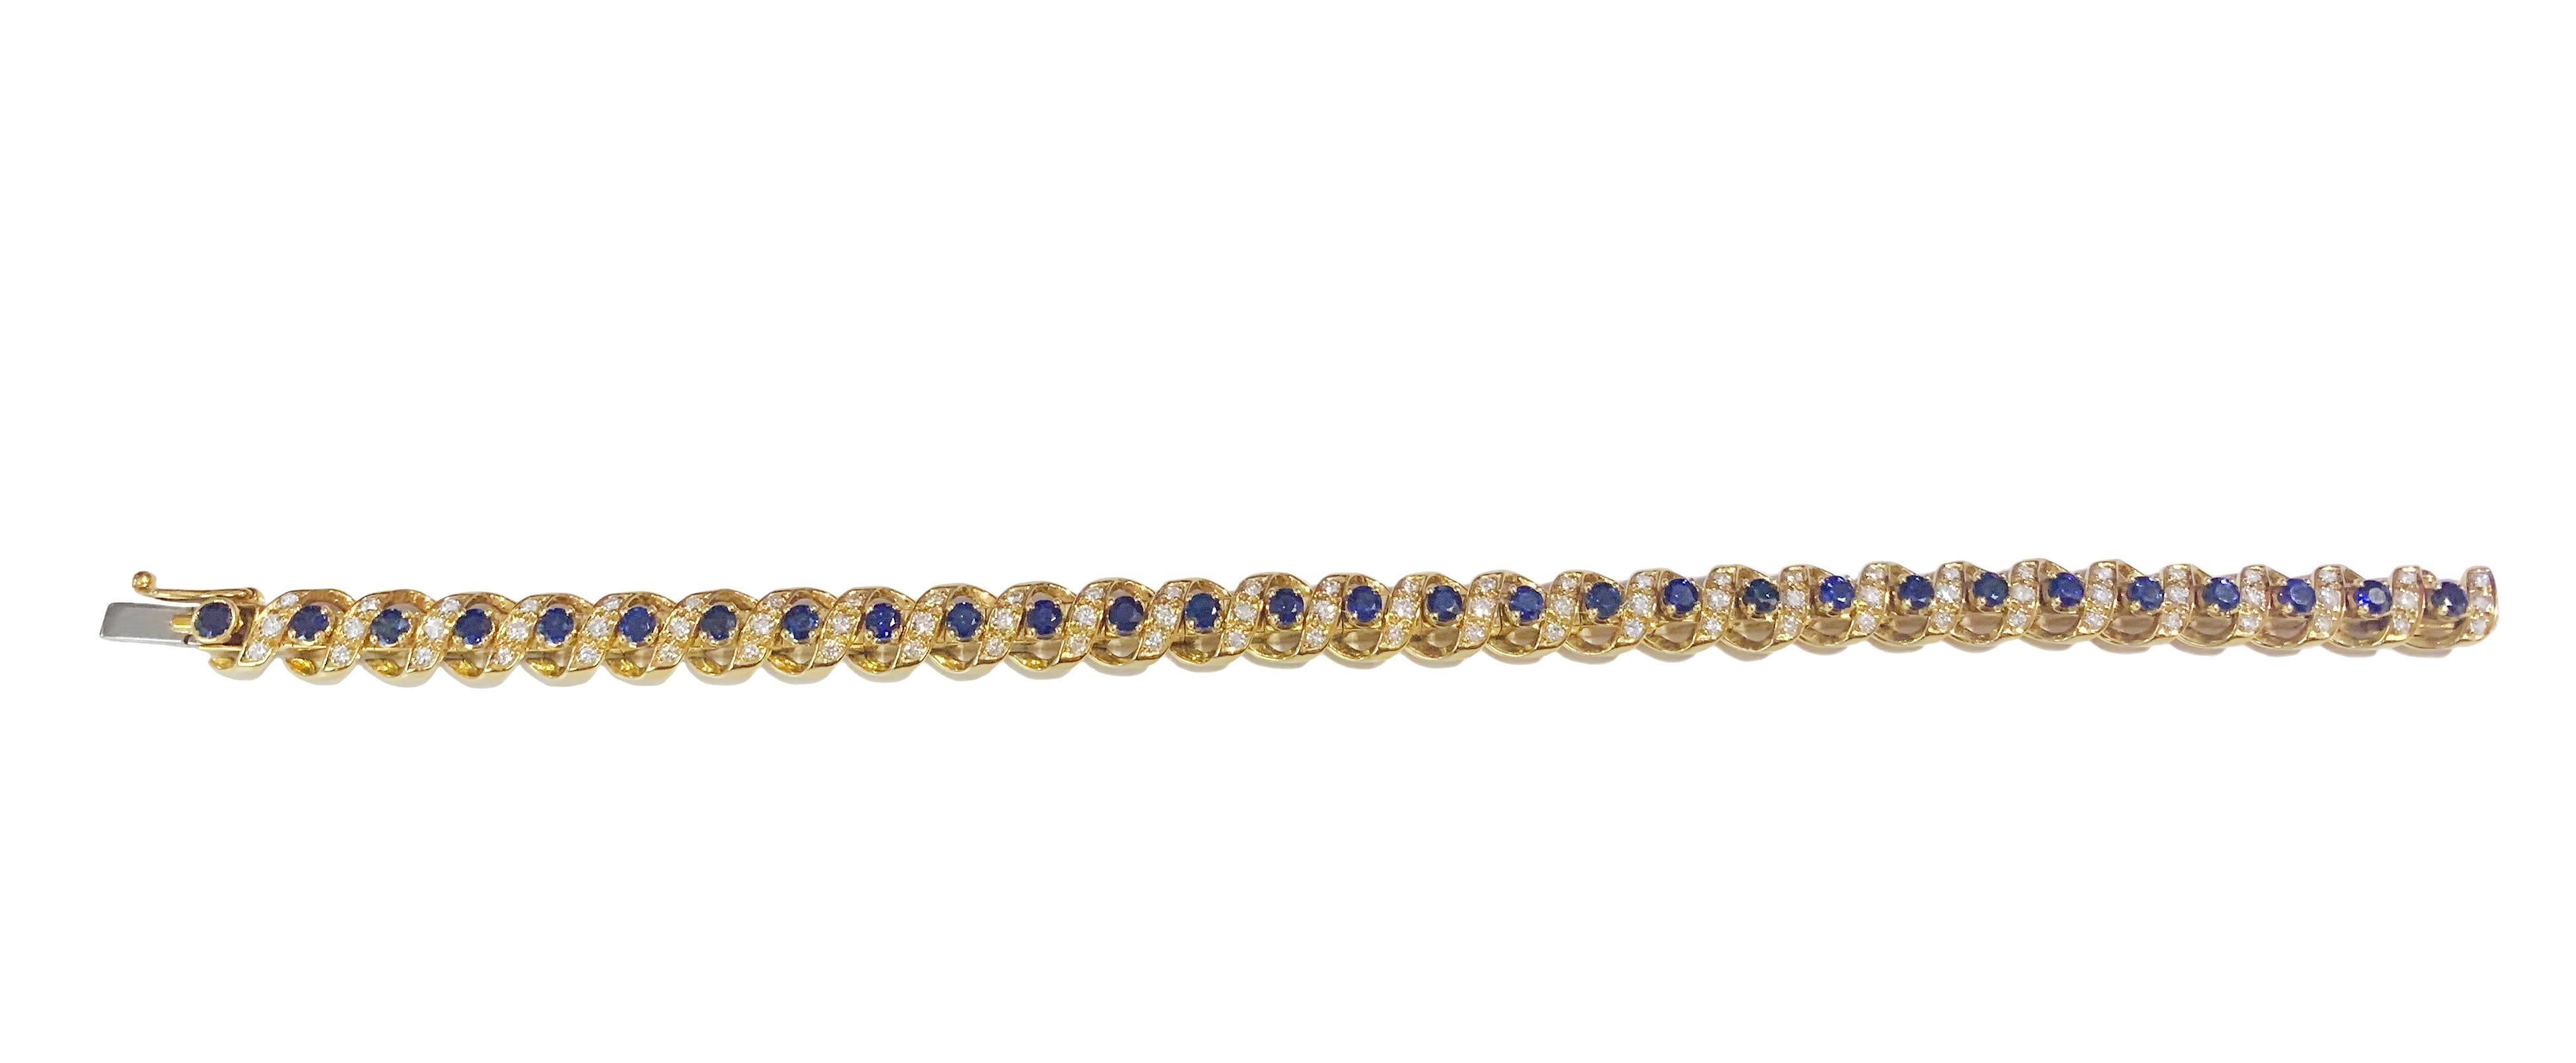 Mint condition
Swiss Made
18k yellow gold
2.9ctw of natural sapphire and approx. 1.2ctw of diamonds
Length: 7”
Width: 0.26”
Fully marked 